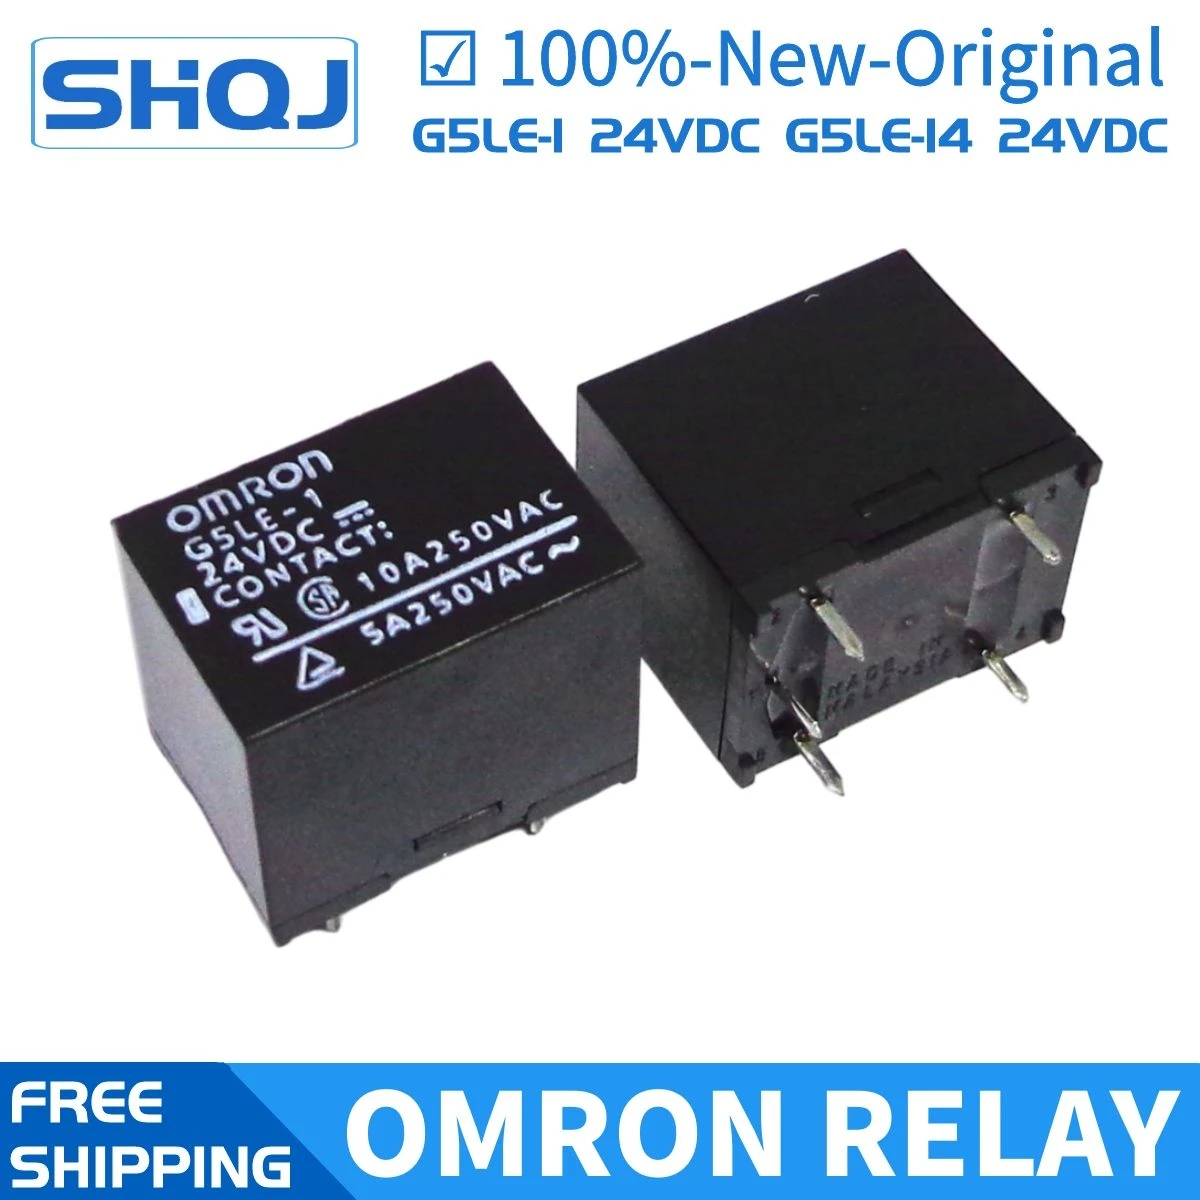 1PC OMRON G5LE-1-VD 24VDC Power Relay SPDT 10A  250VAC 5Pins New